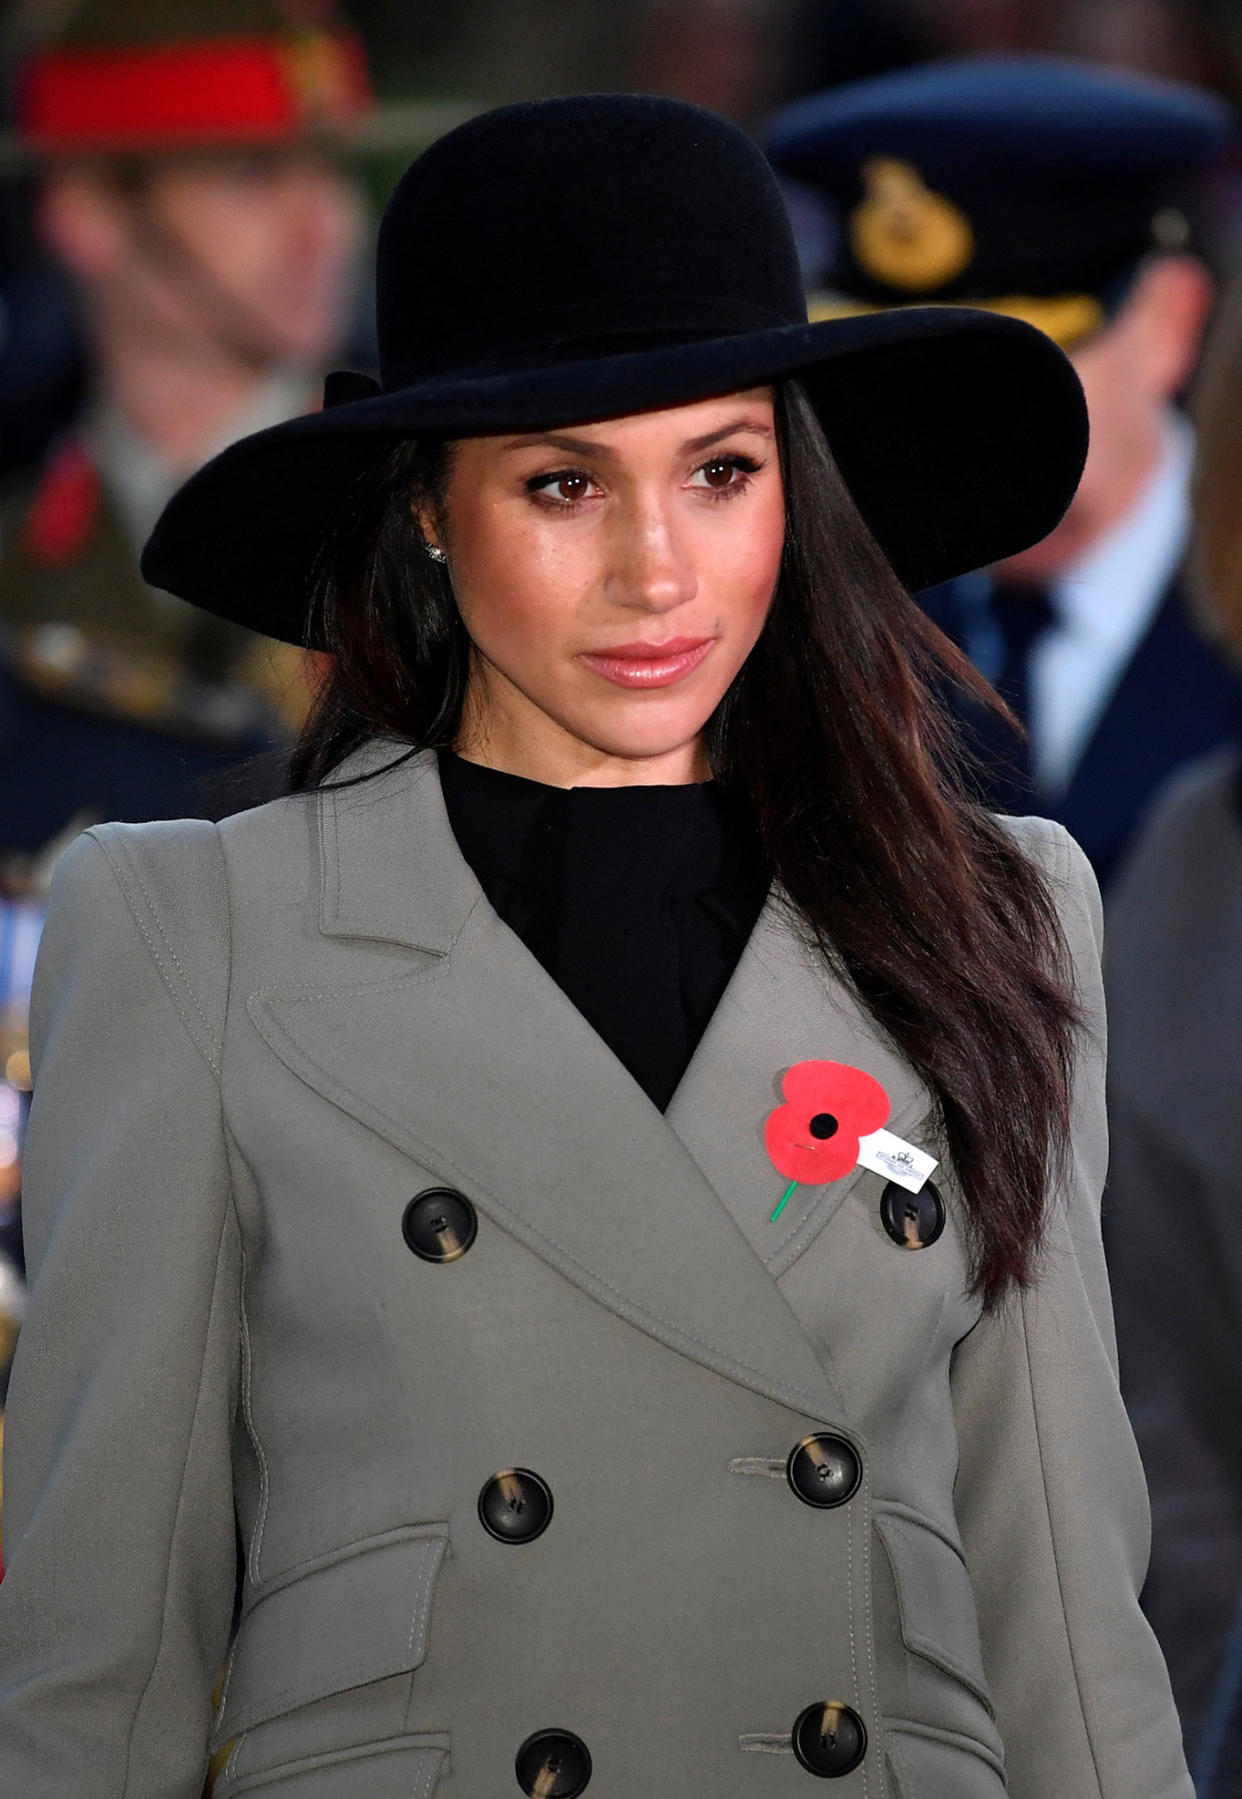 Markle paid her respects with somber style and a poppy pin. (Photo: Toby Melville/AFP/Getty Images)